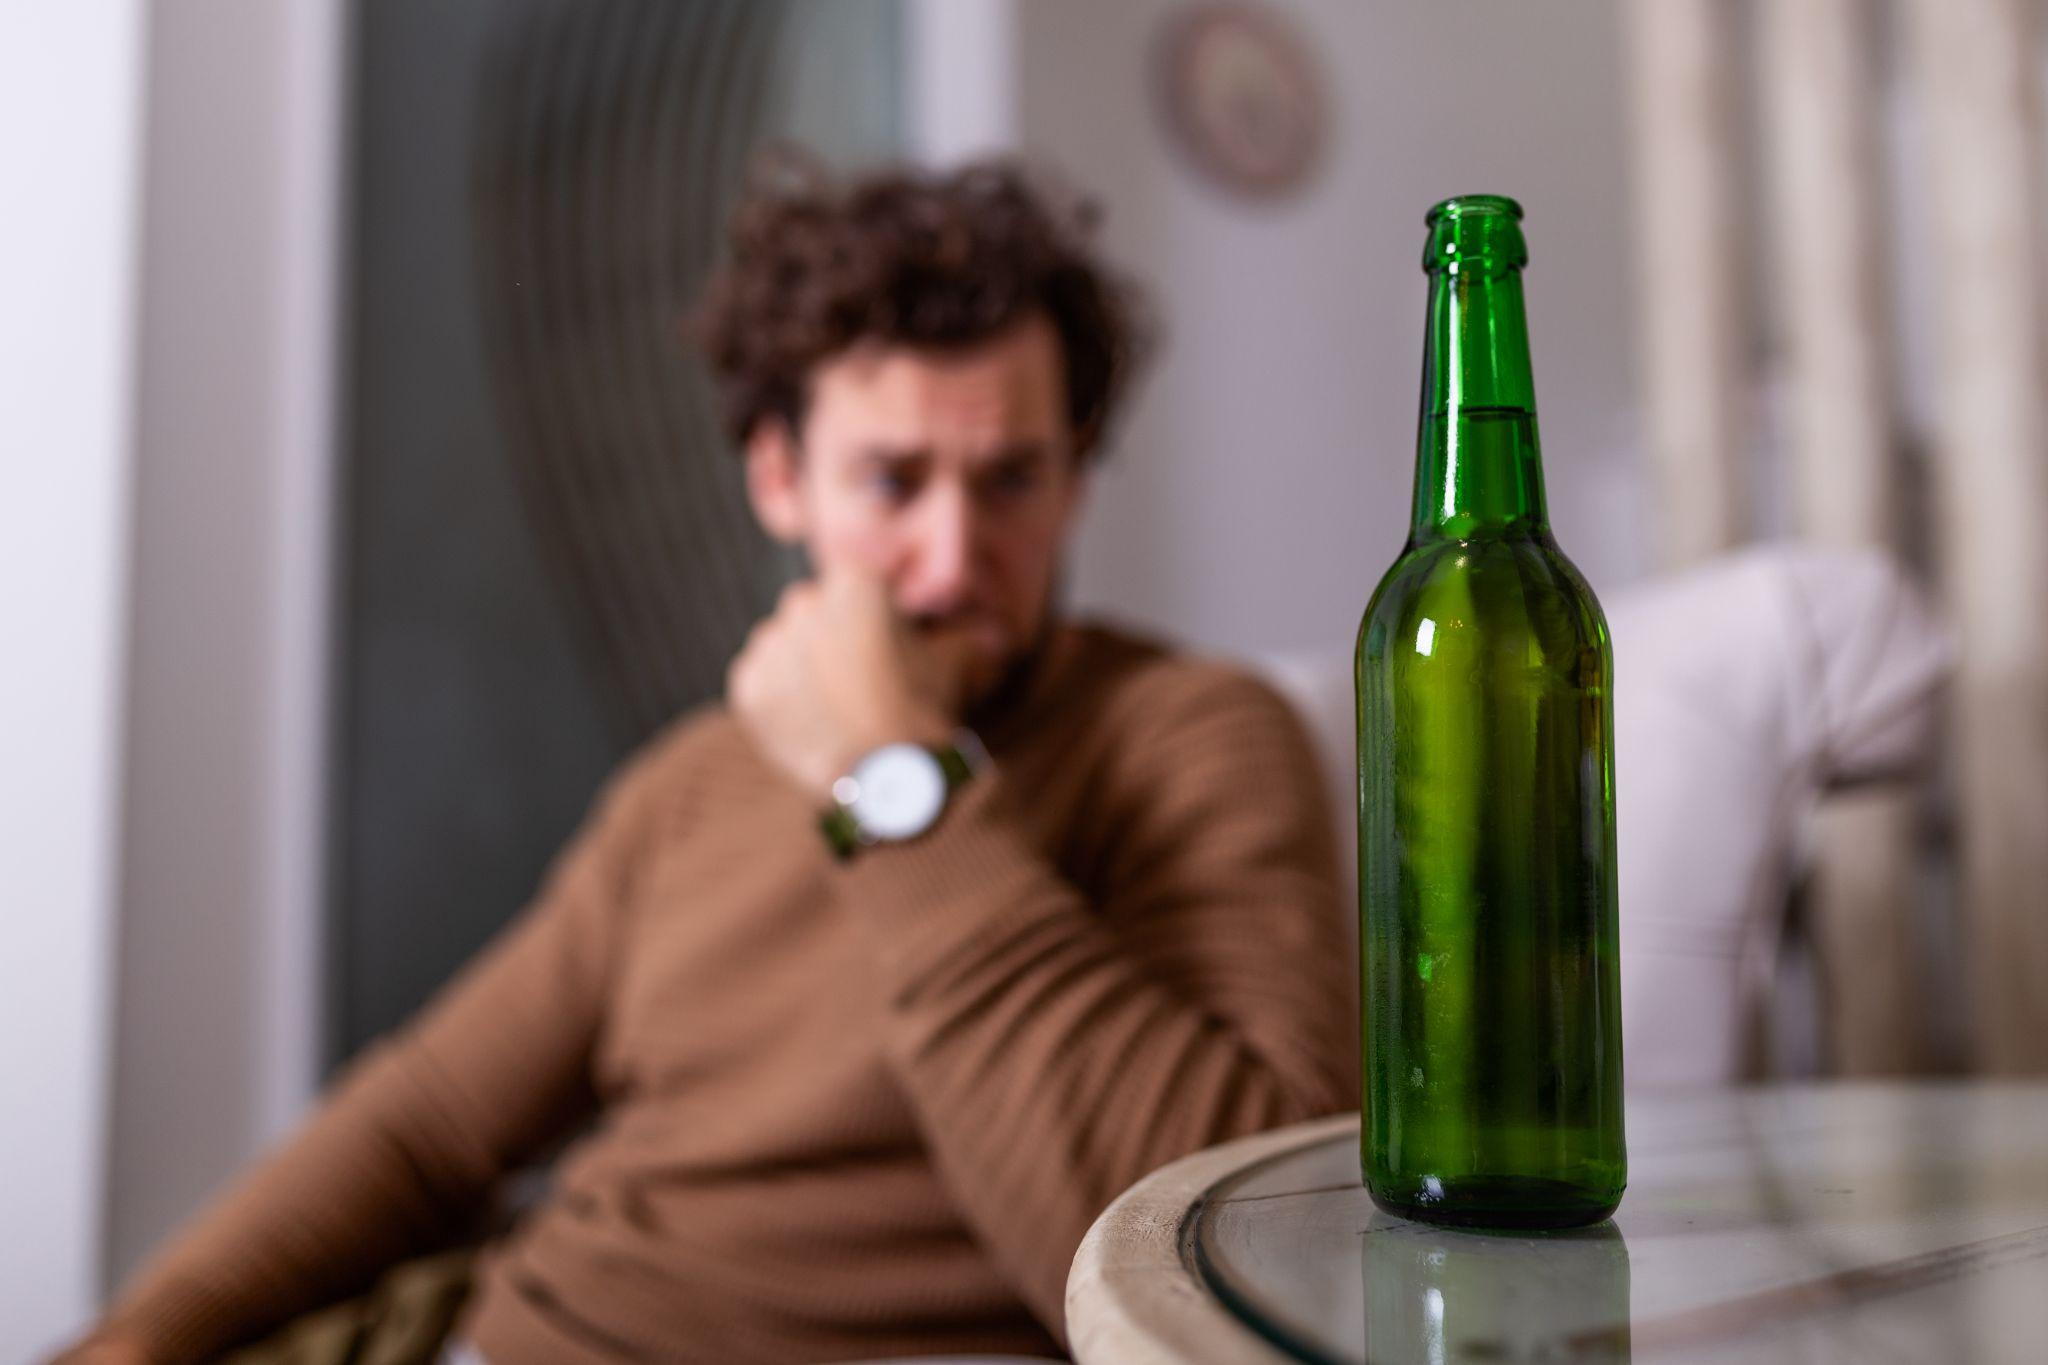 Alcoholic man reaching for bottle of beer, Man drinking home alone.